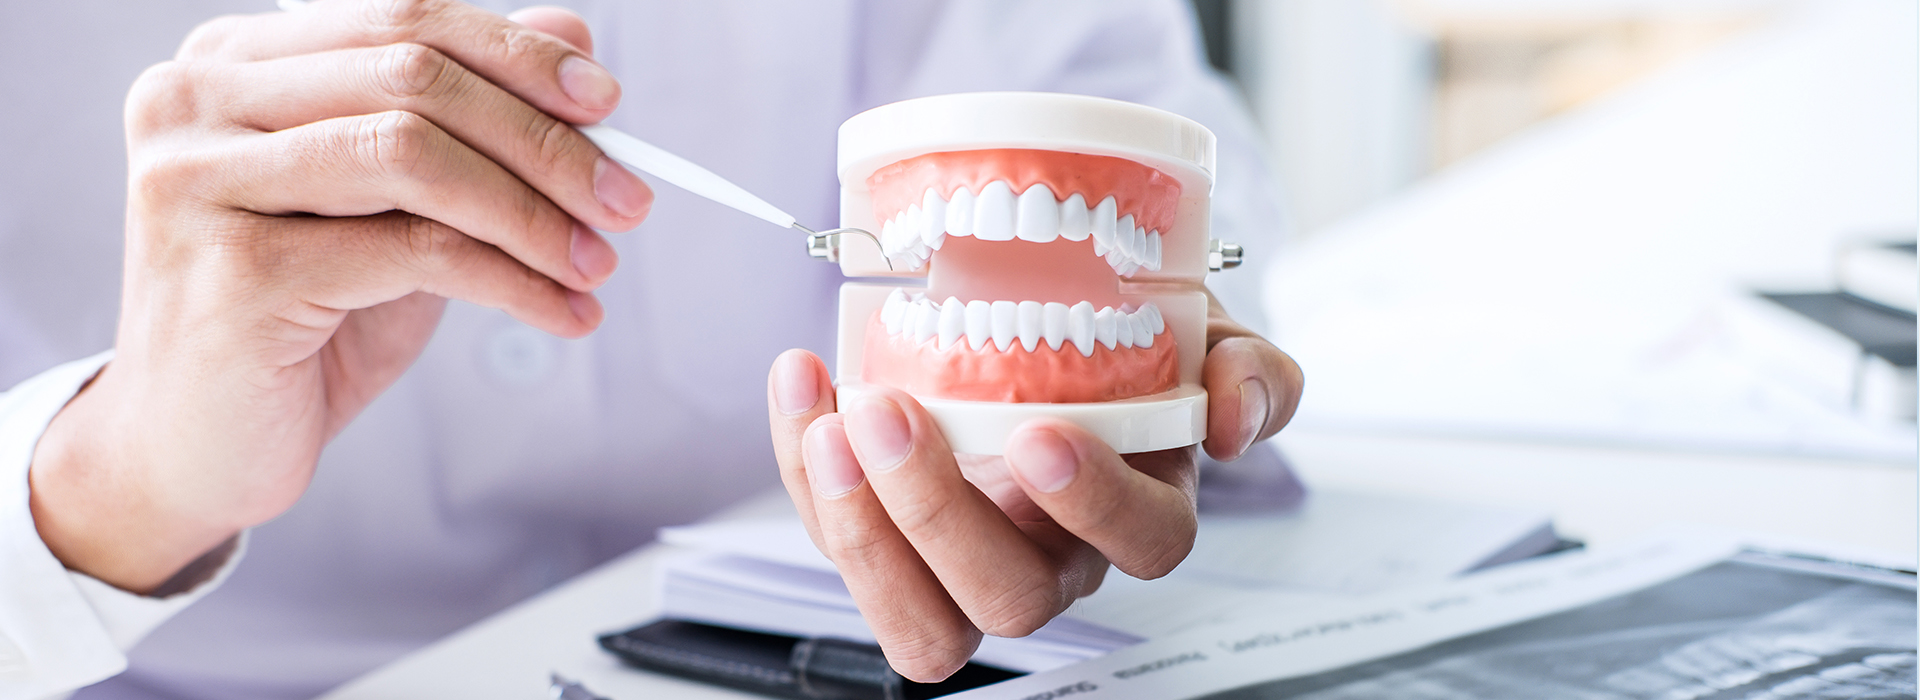 A person is holding a toothbrush with a toothpaste tube, while another person, possibly a dentist, is examining their teeth in a dental office setting.